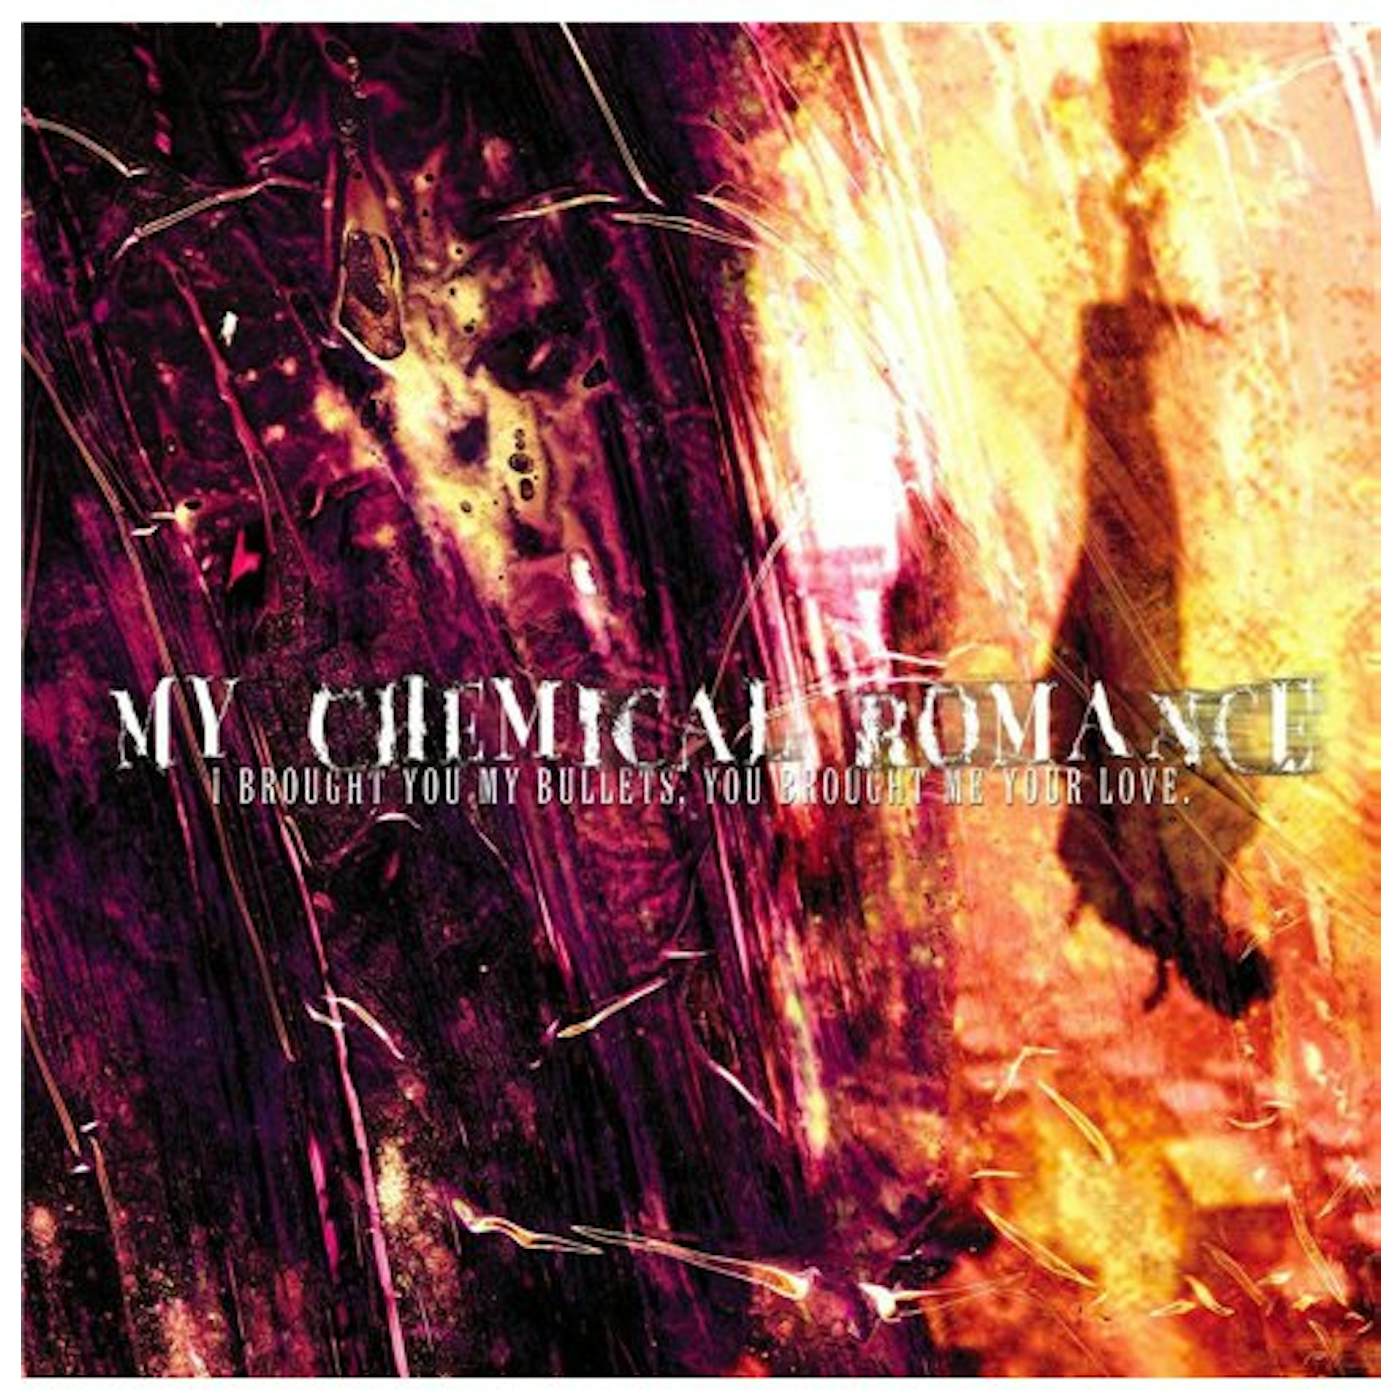 My Chemical Romance I Brought You My Bullets, You Brought Me Your Love Vinyl Record